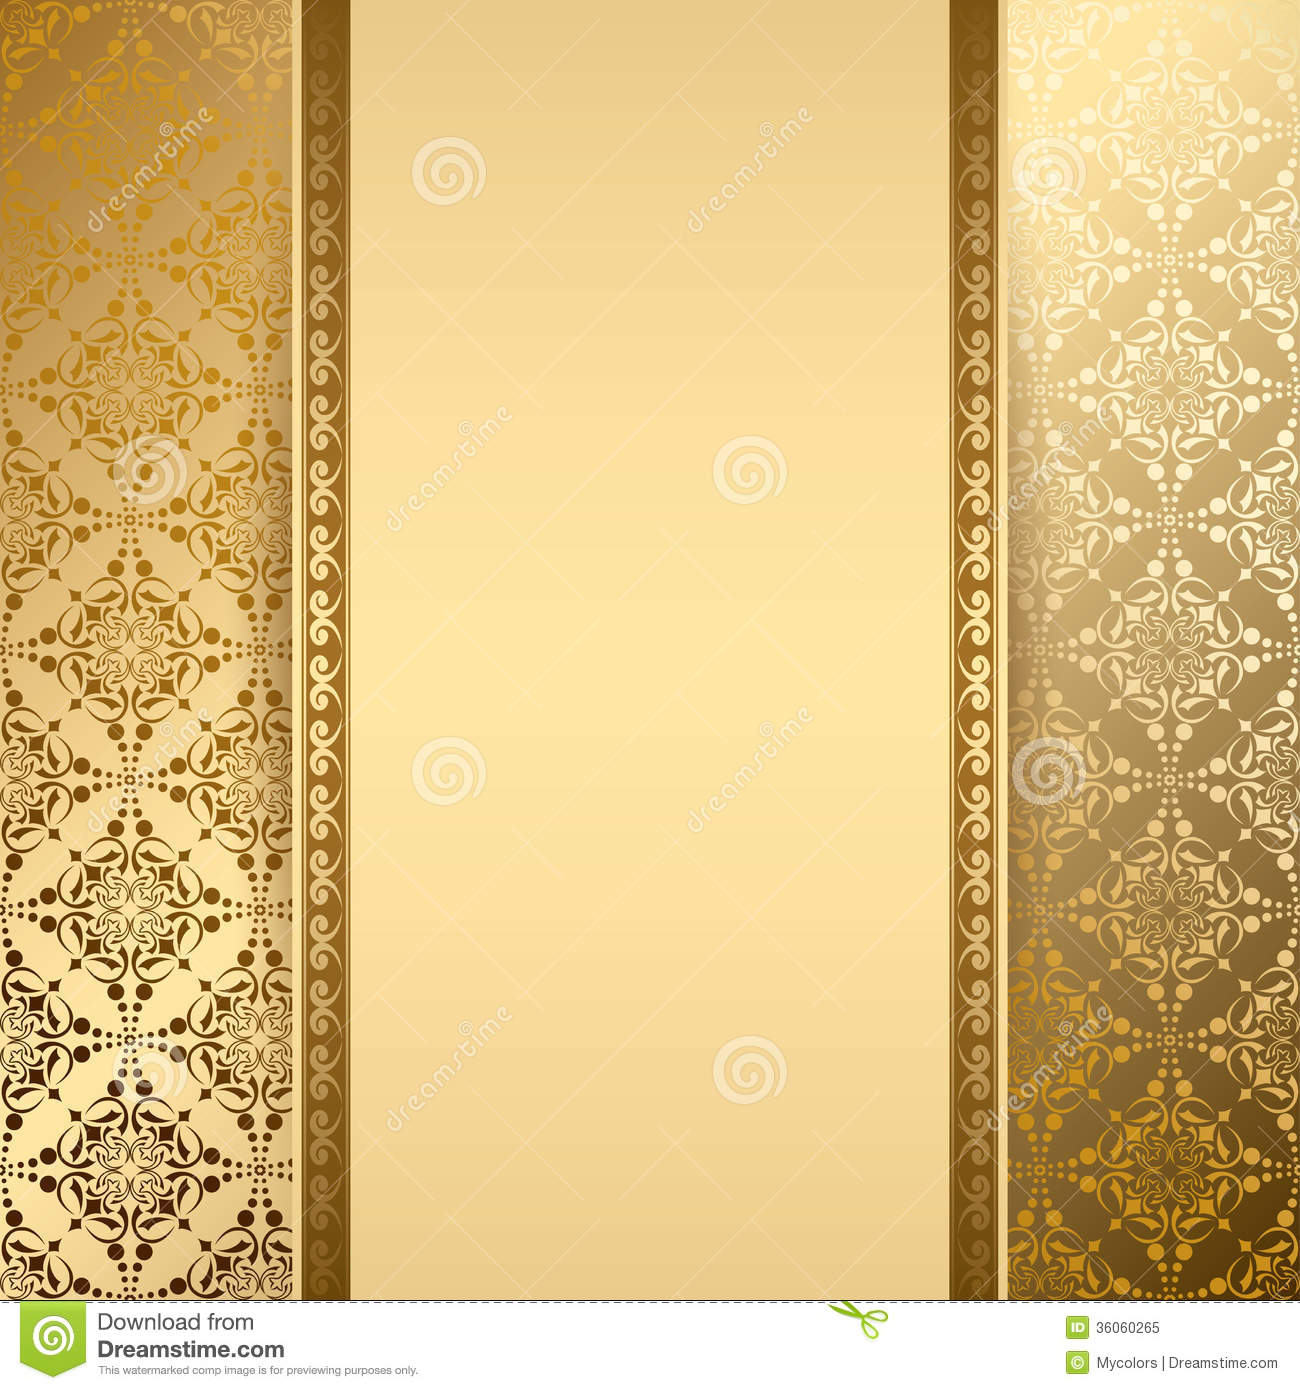 Free vector background patterns download